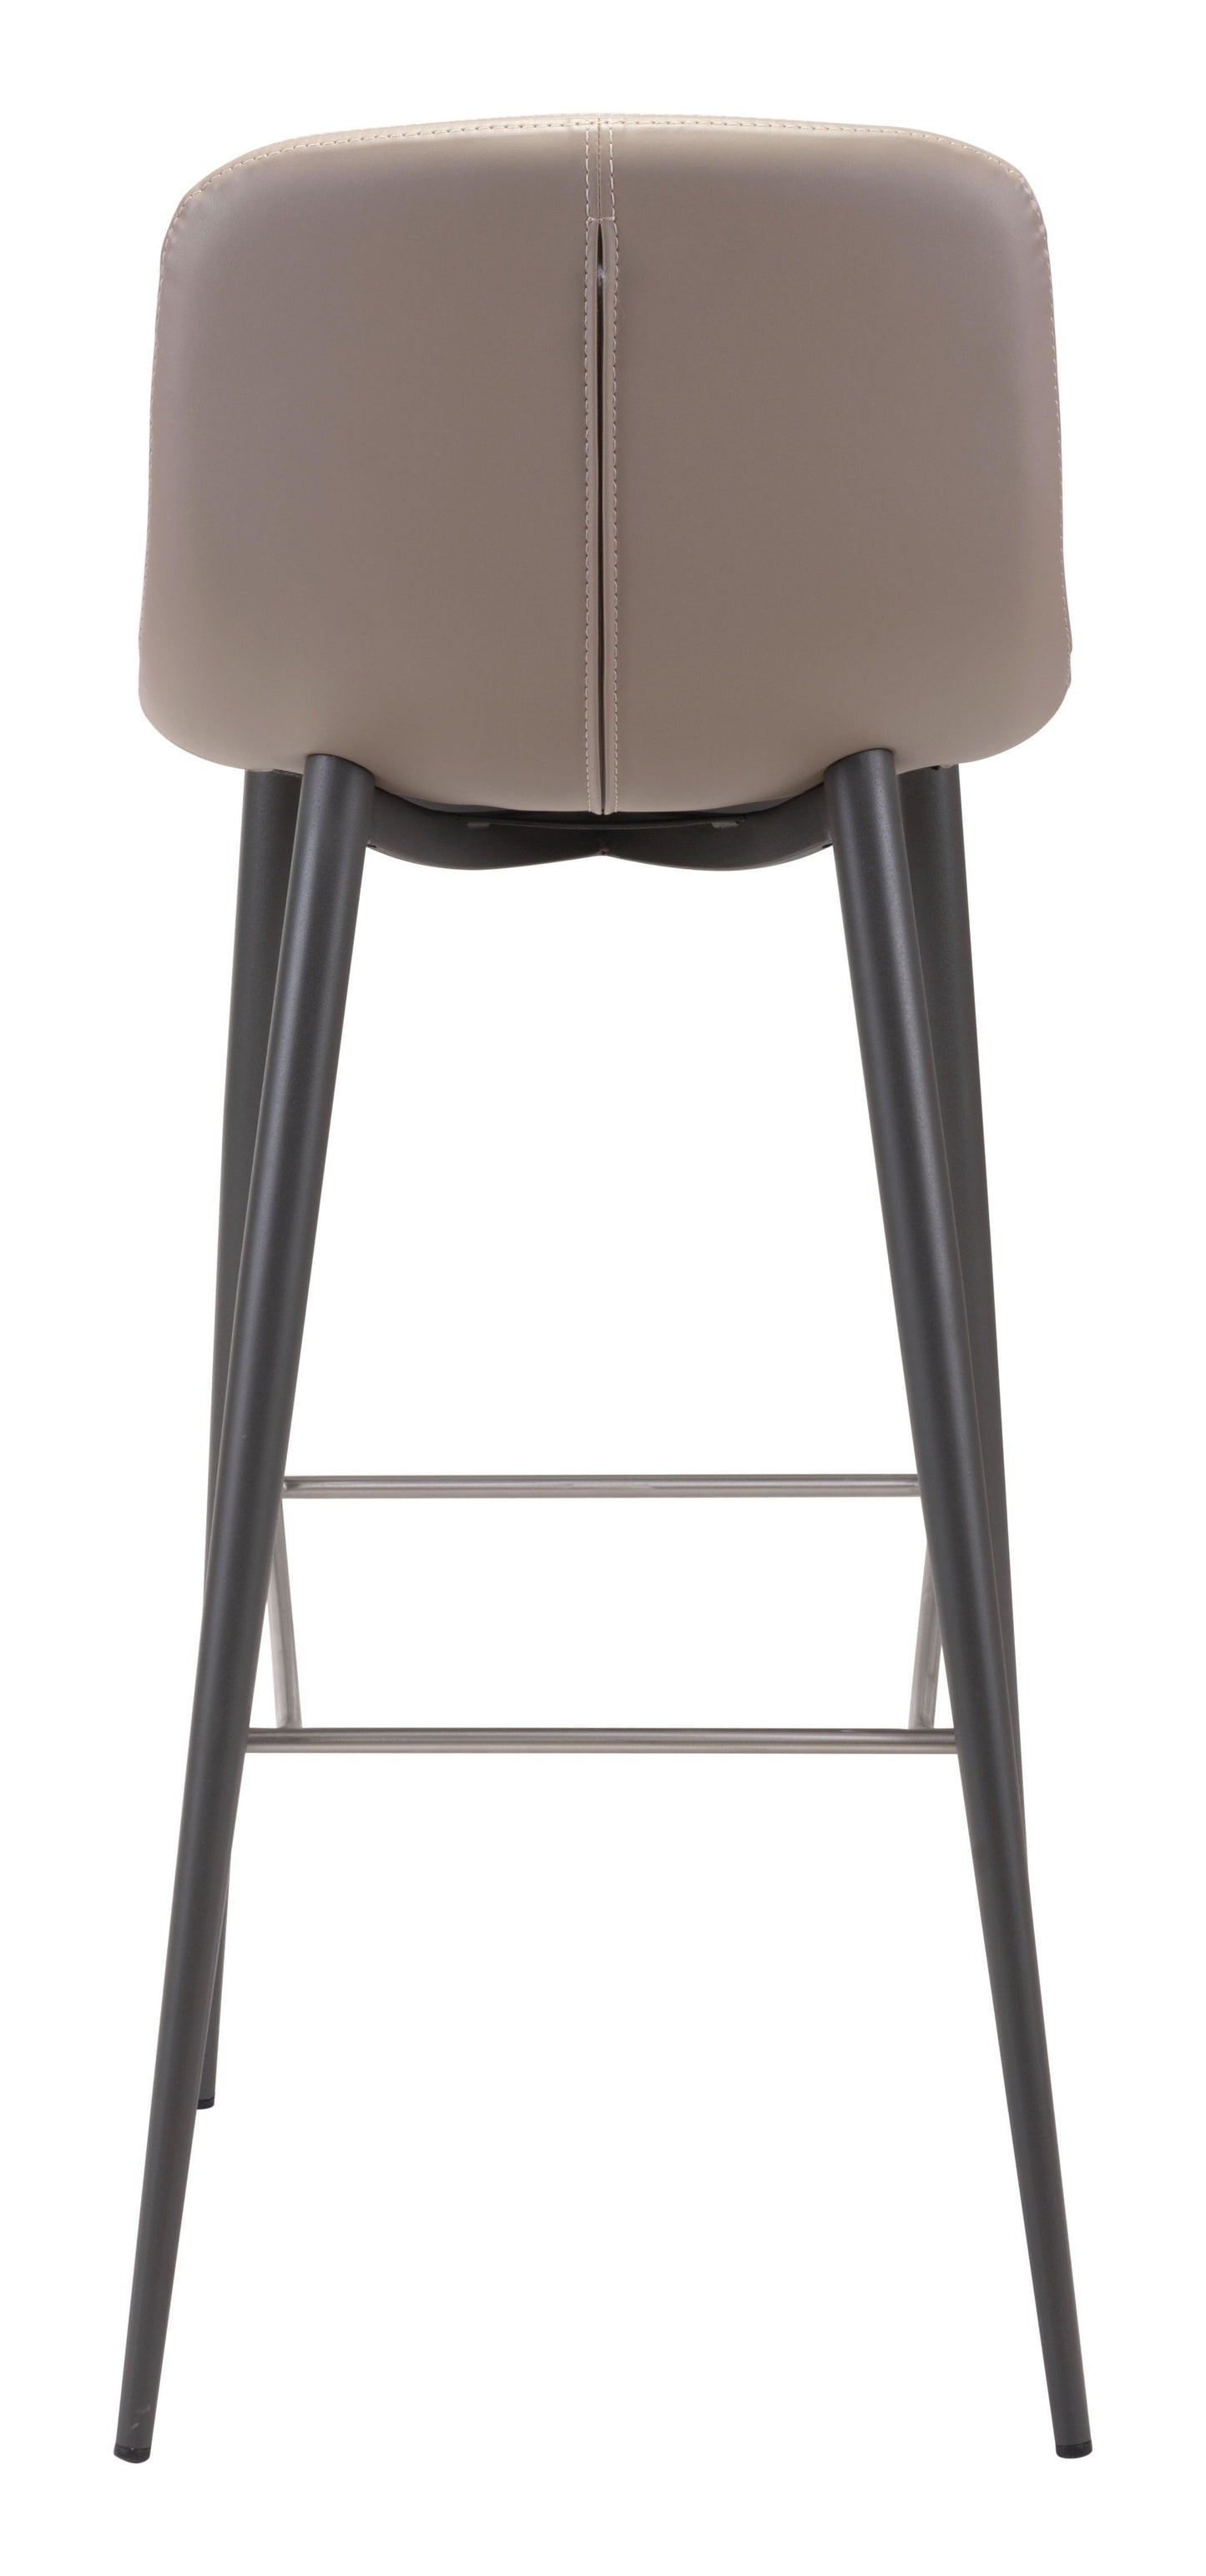 Tangiers Bar Chair Taupe